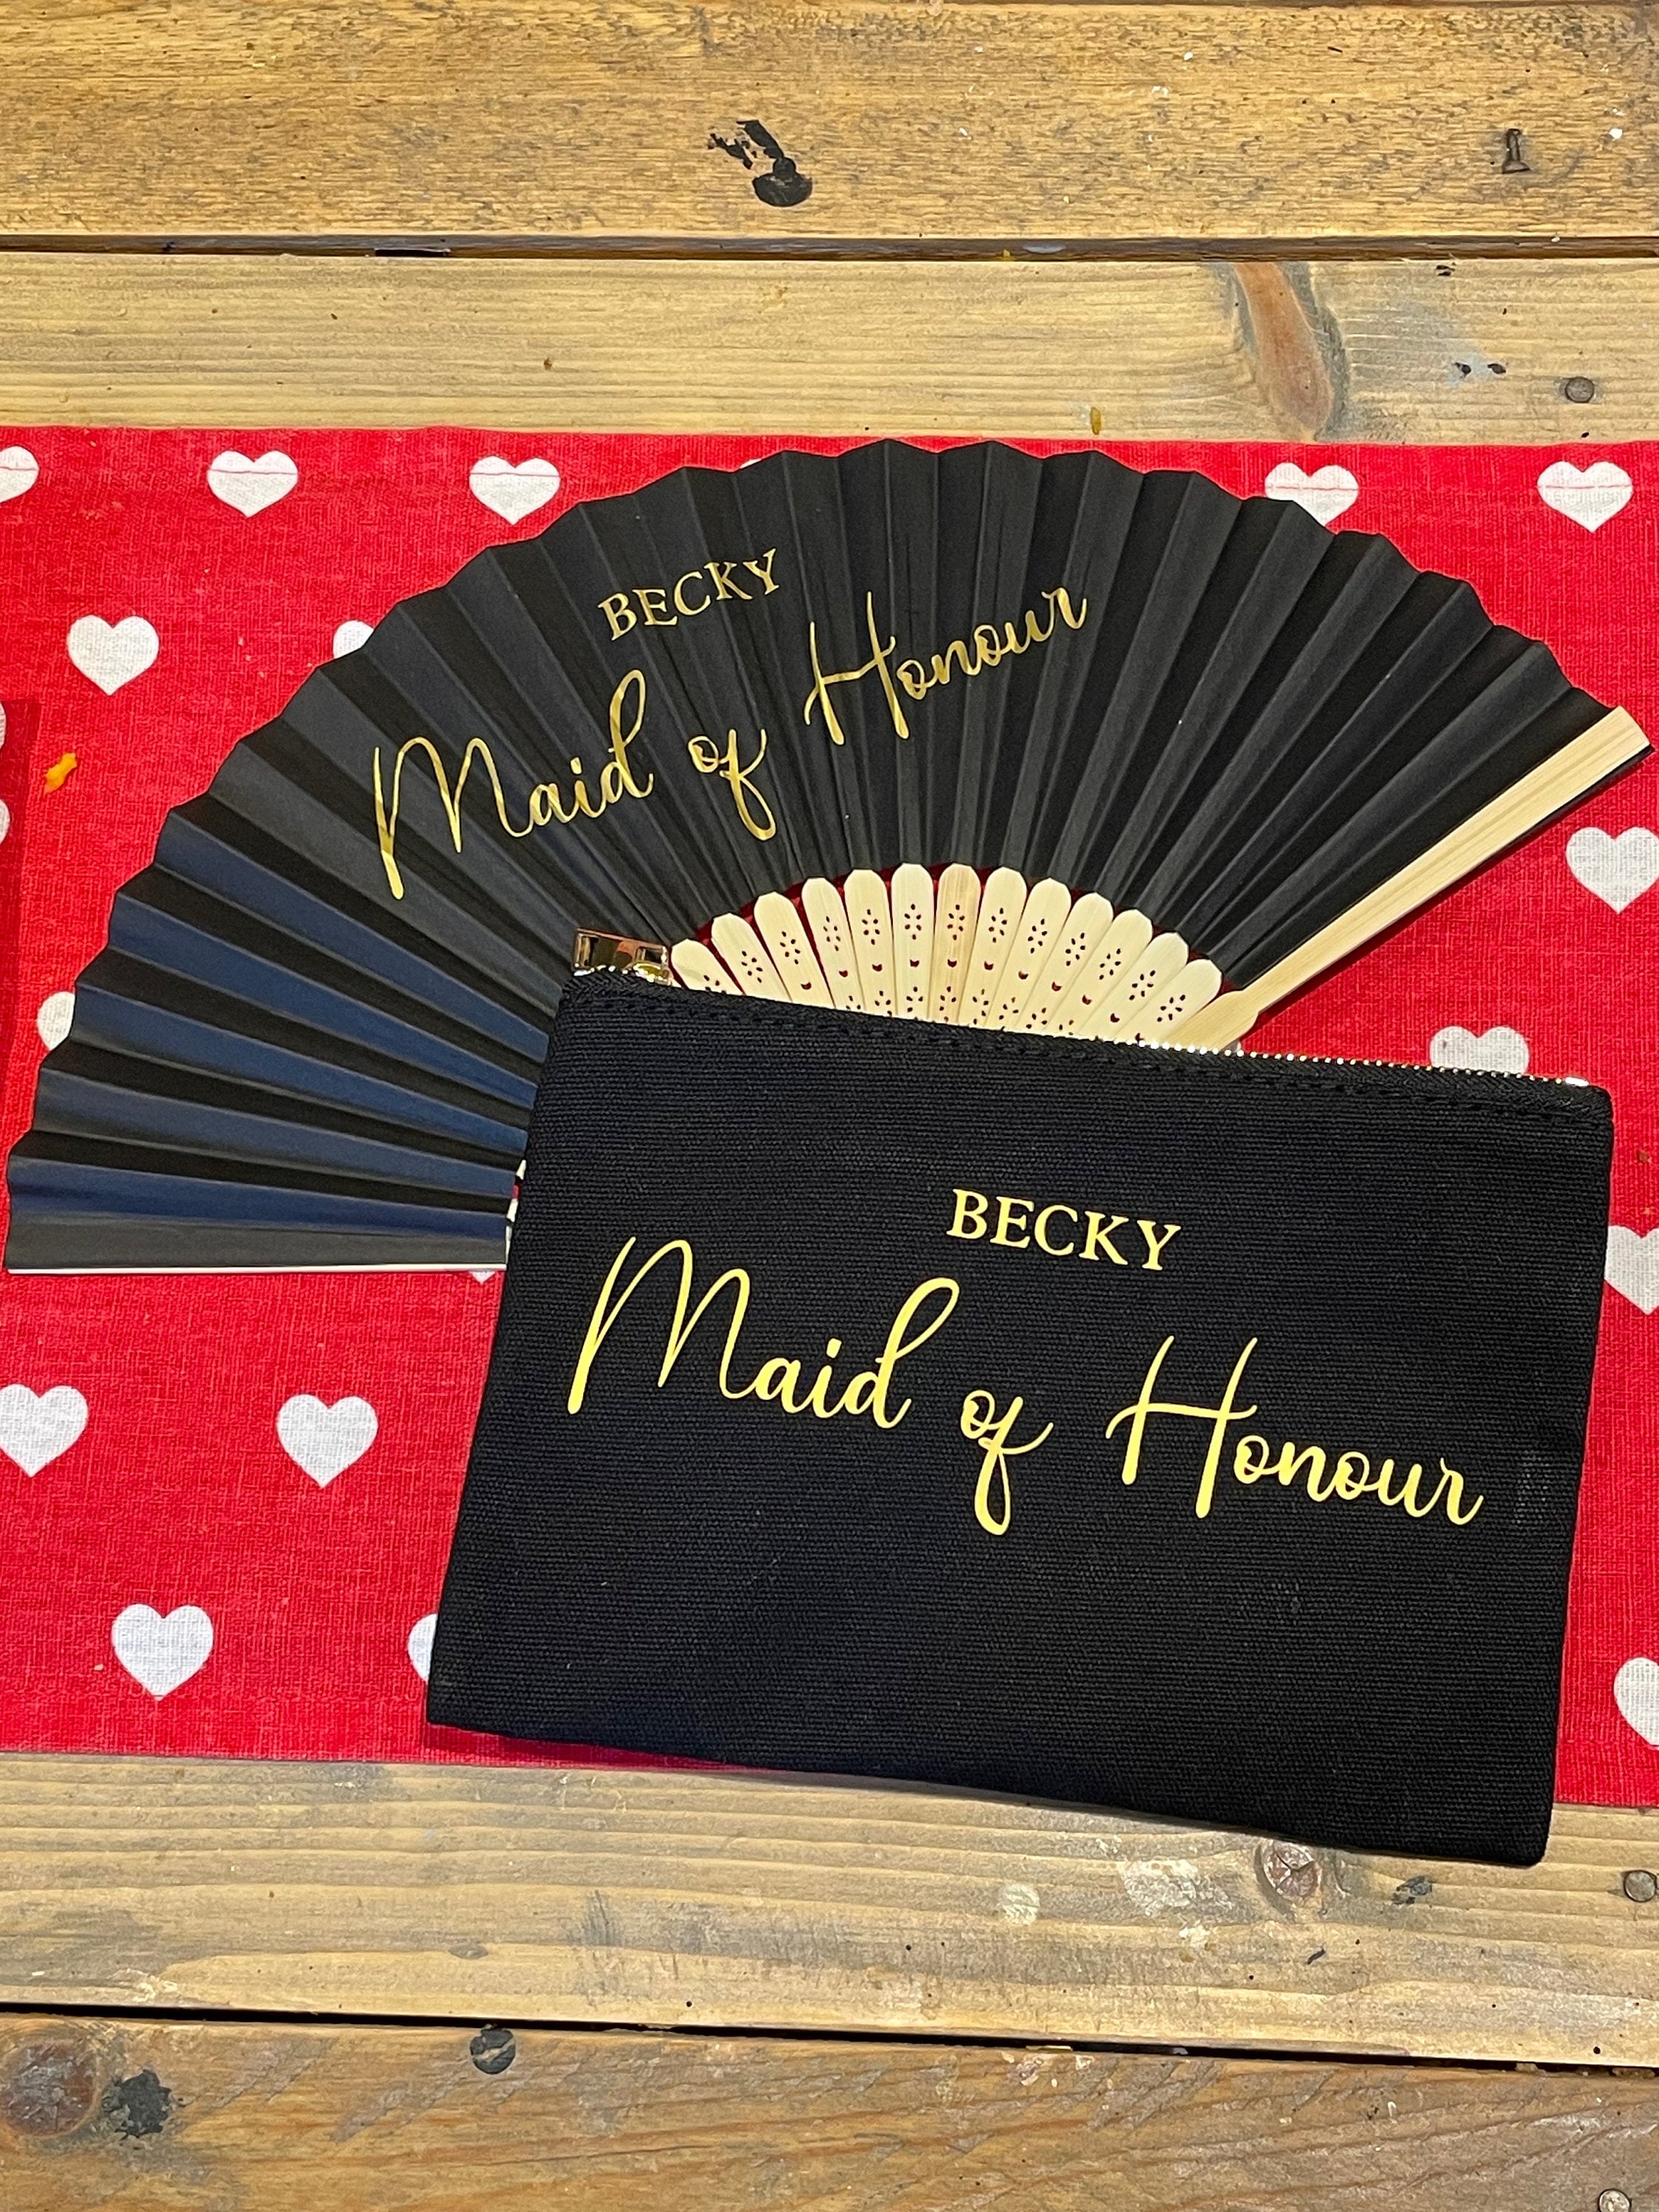 JuJuJuGifts Paper and Bamboo Personalised Hand Fan White Pink Black Wedding Hen Party Girls Holiday Gift Wedding Birthday Bulk Order Baby Shower Bride